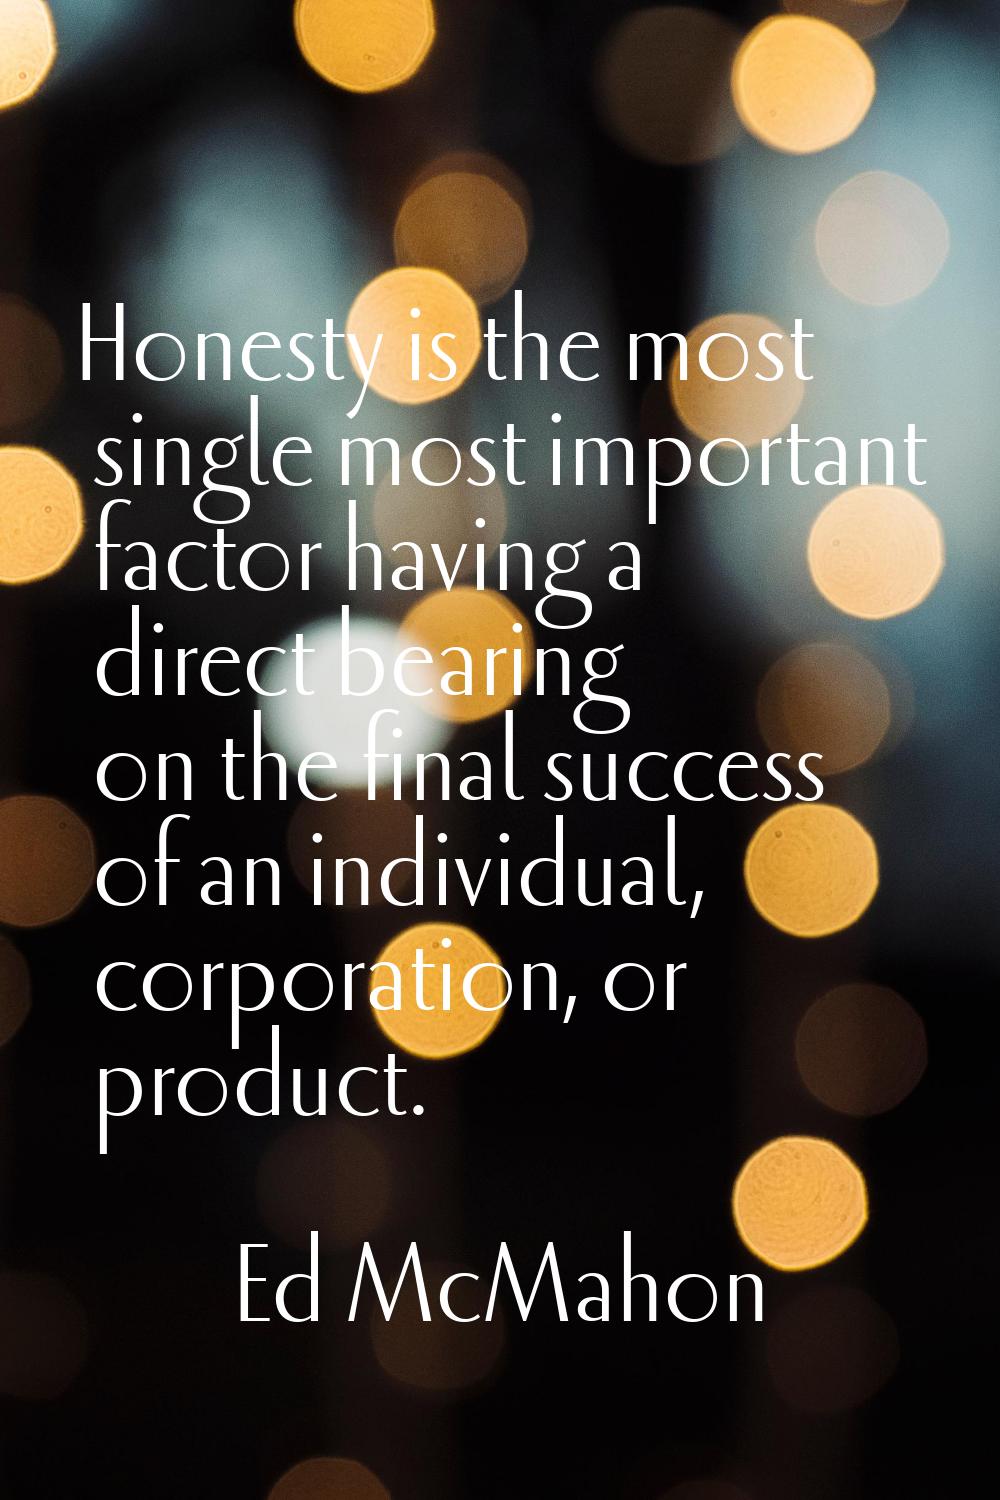 Honesty is the most single most important factor having a direct bearing on the final success of an